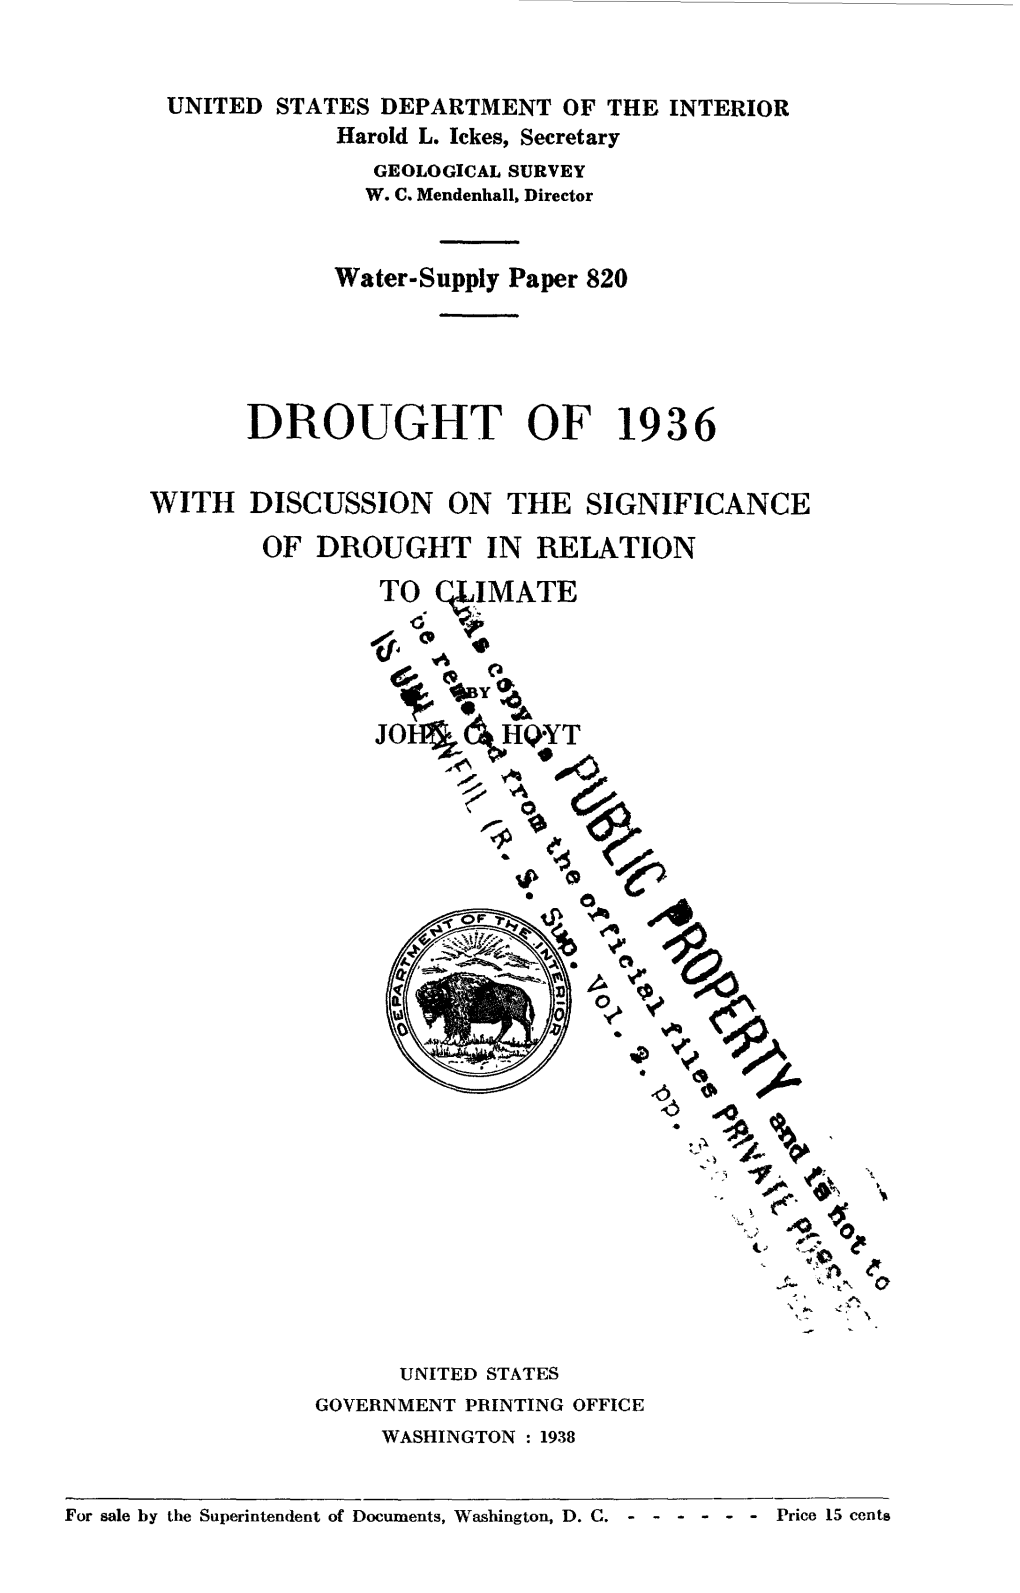 Drought of 1936